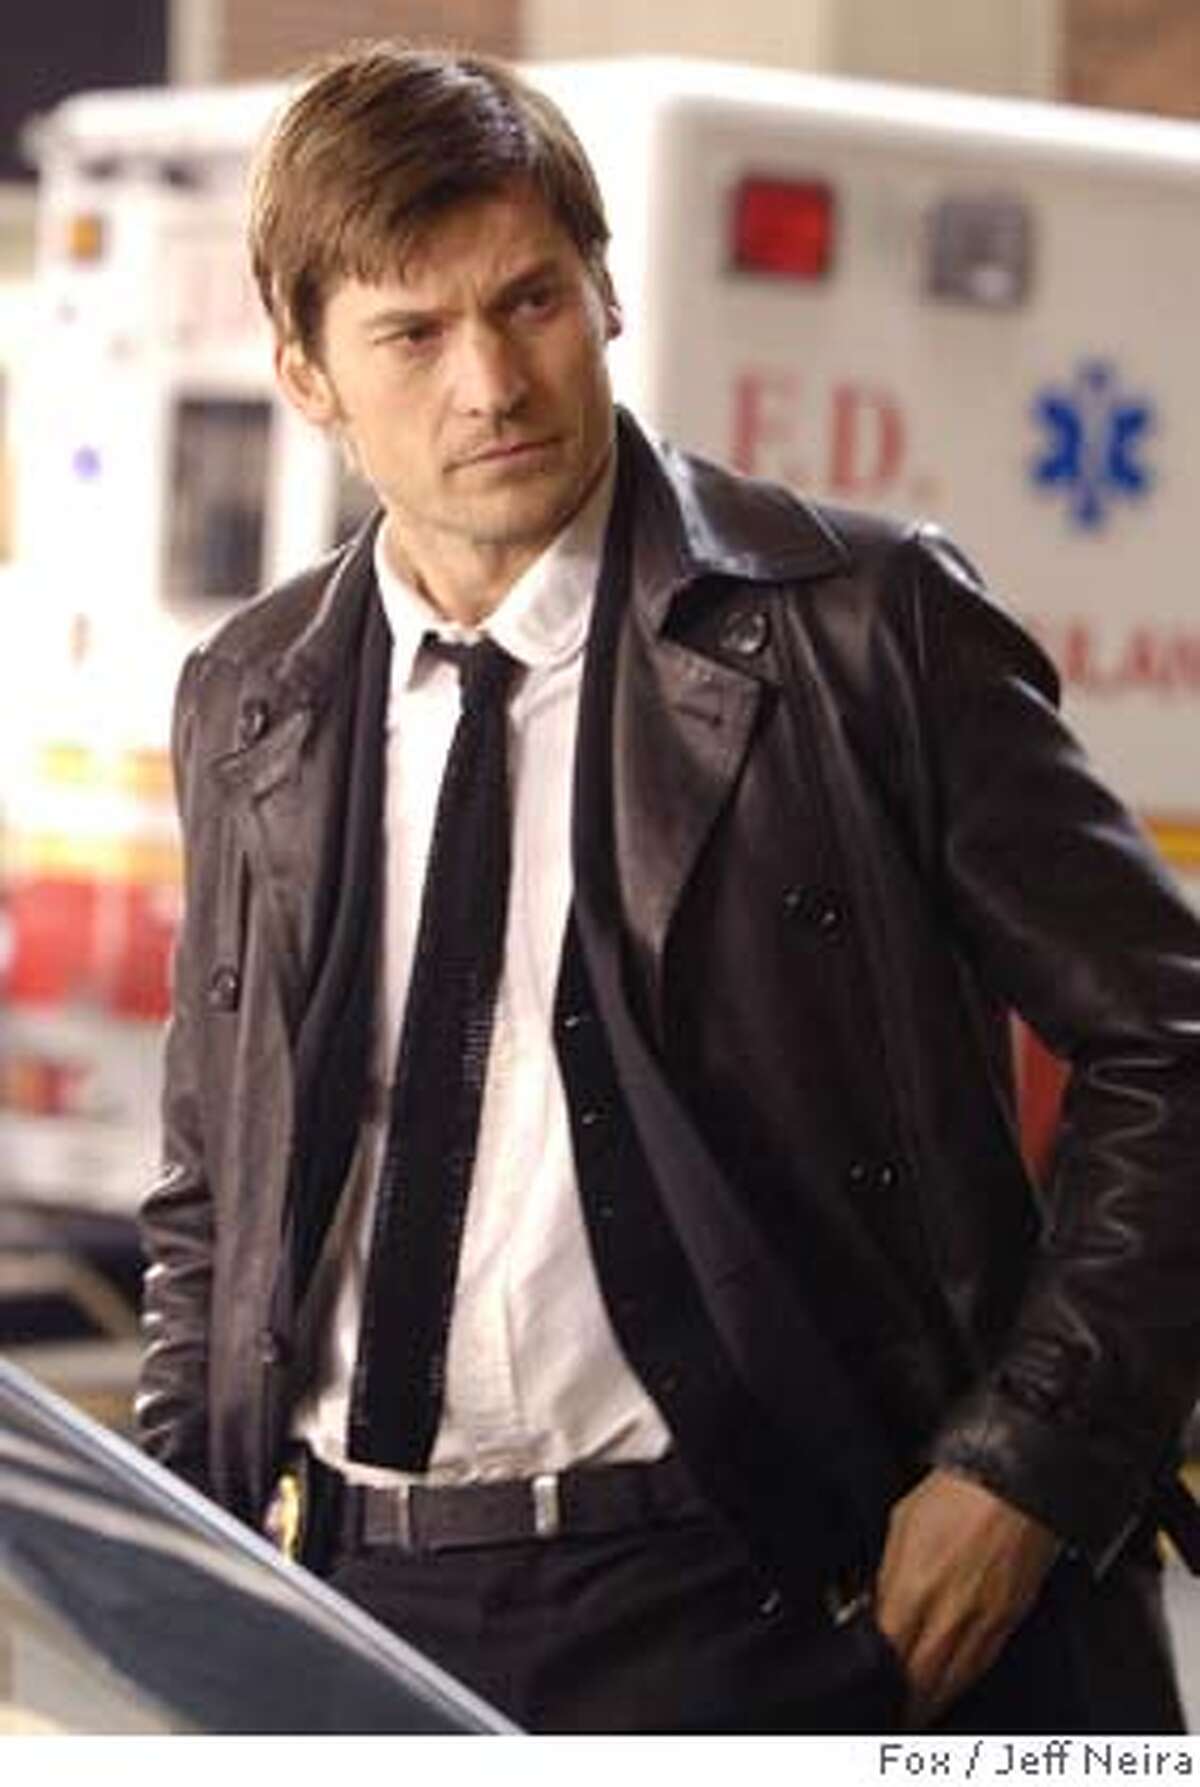 NEW AMSTERDAM: New York Police Detective John Amsterdam (Nikolaj Coster-Waldau) is a man who has been granted eternal life until he meets his soulmate in the new drama NEW AMSTERDAM previewing Tuesday, March 4 (9:00-10:00 PM ET/PT) on FOX. CR: Jeff Neira/FOX